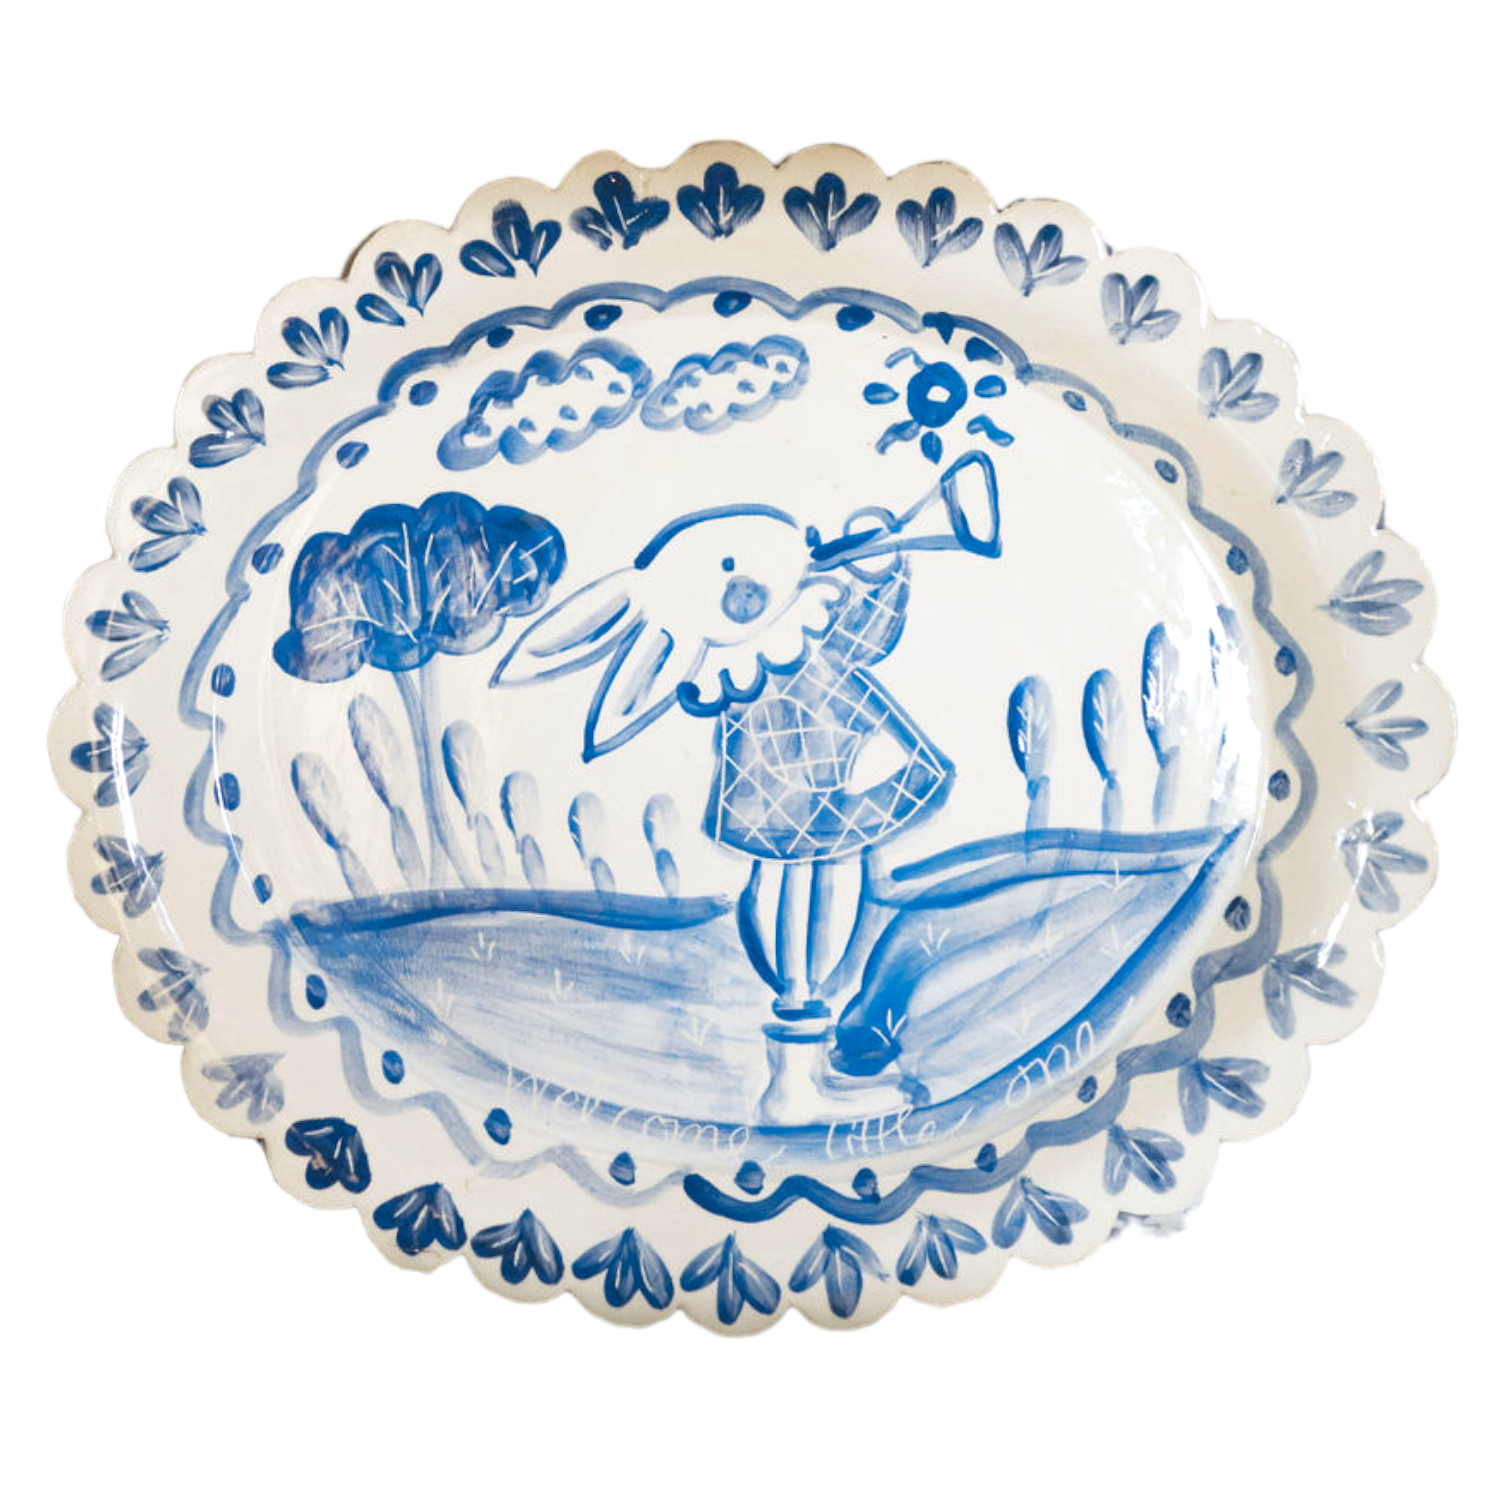 Scalloped Birth Plate - Blue with Rabbit - Premium  from Tricia Lowenfield Design 